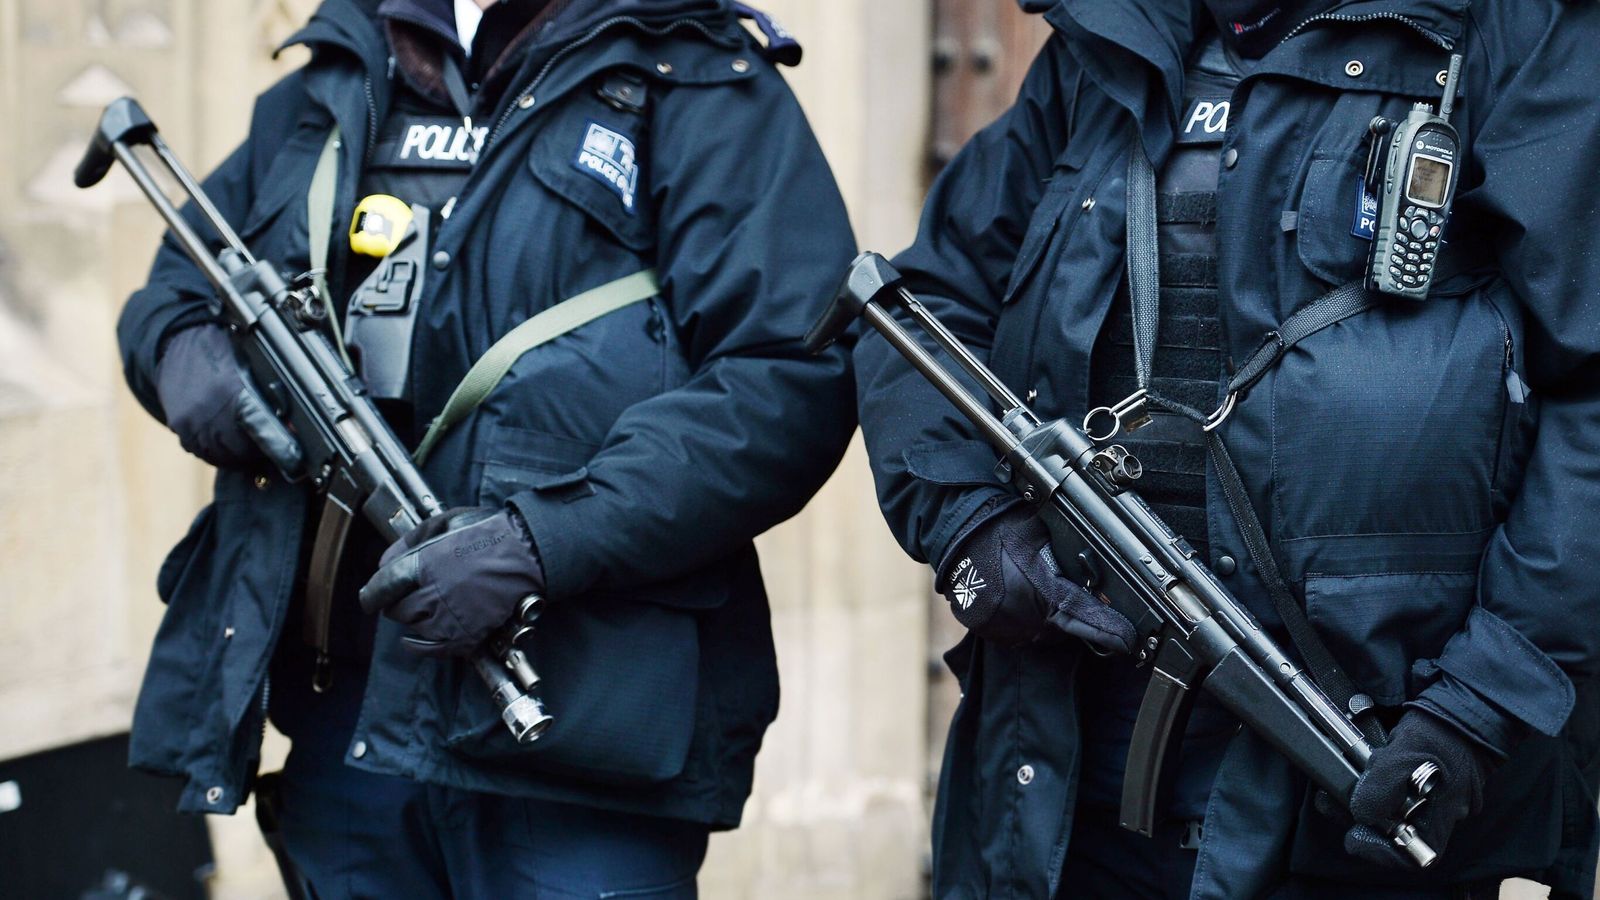 Chris Kaba: Ministry of Defence offers support to Met Police as armed police officers hand in their weapons